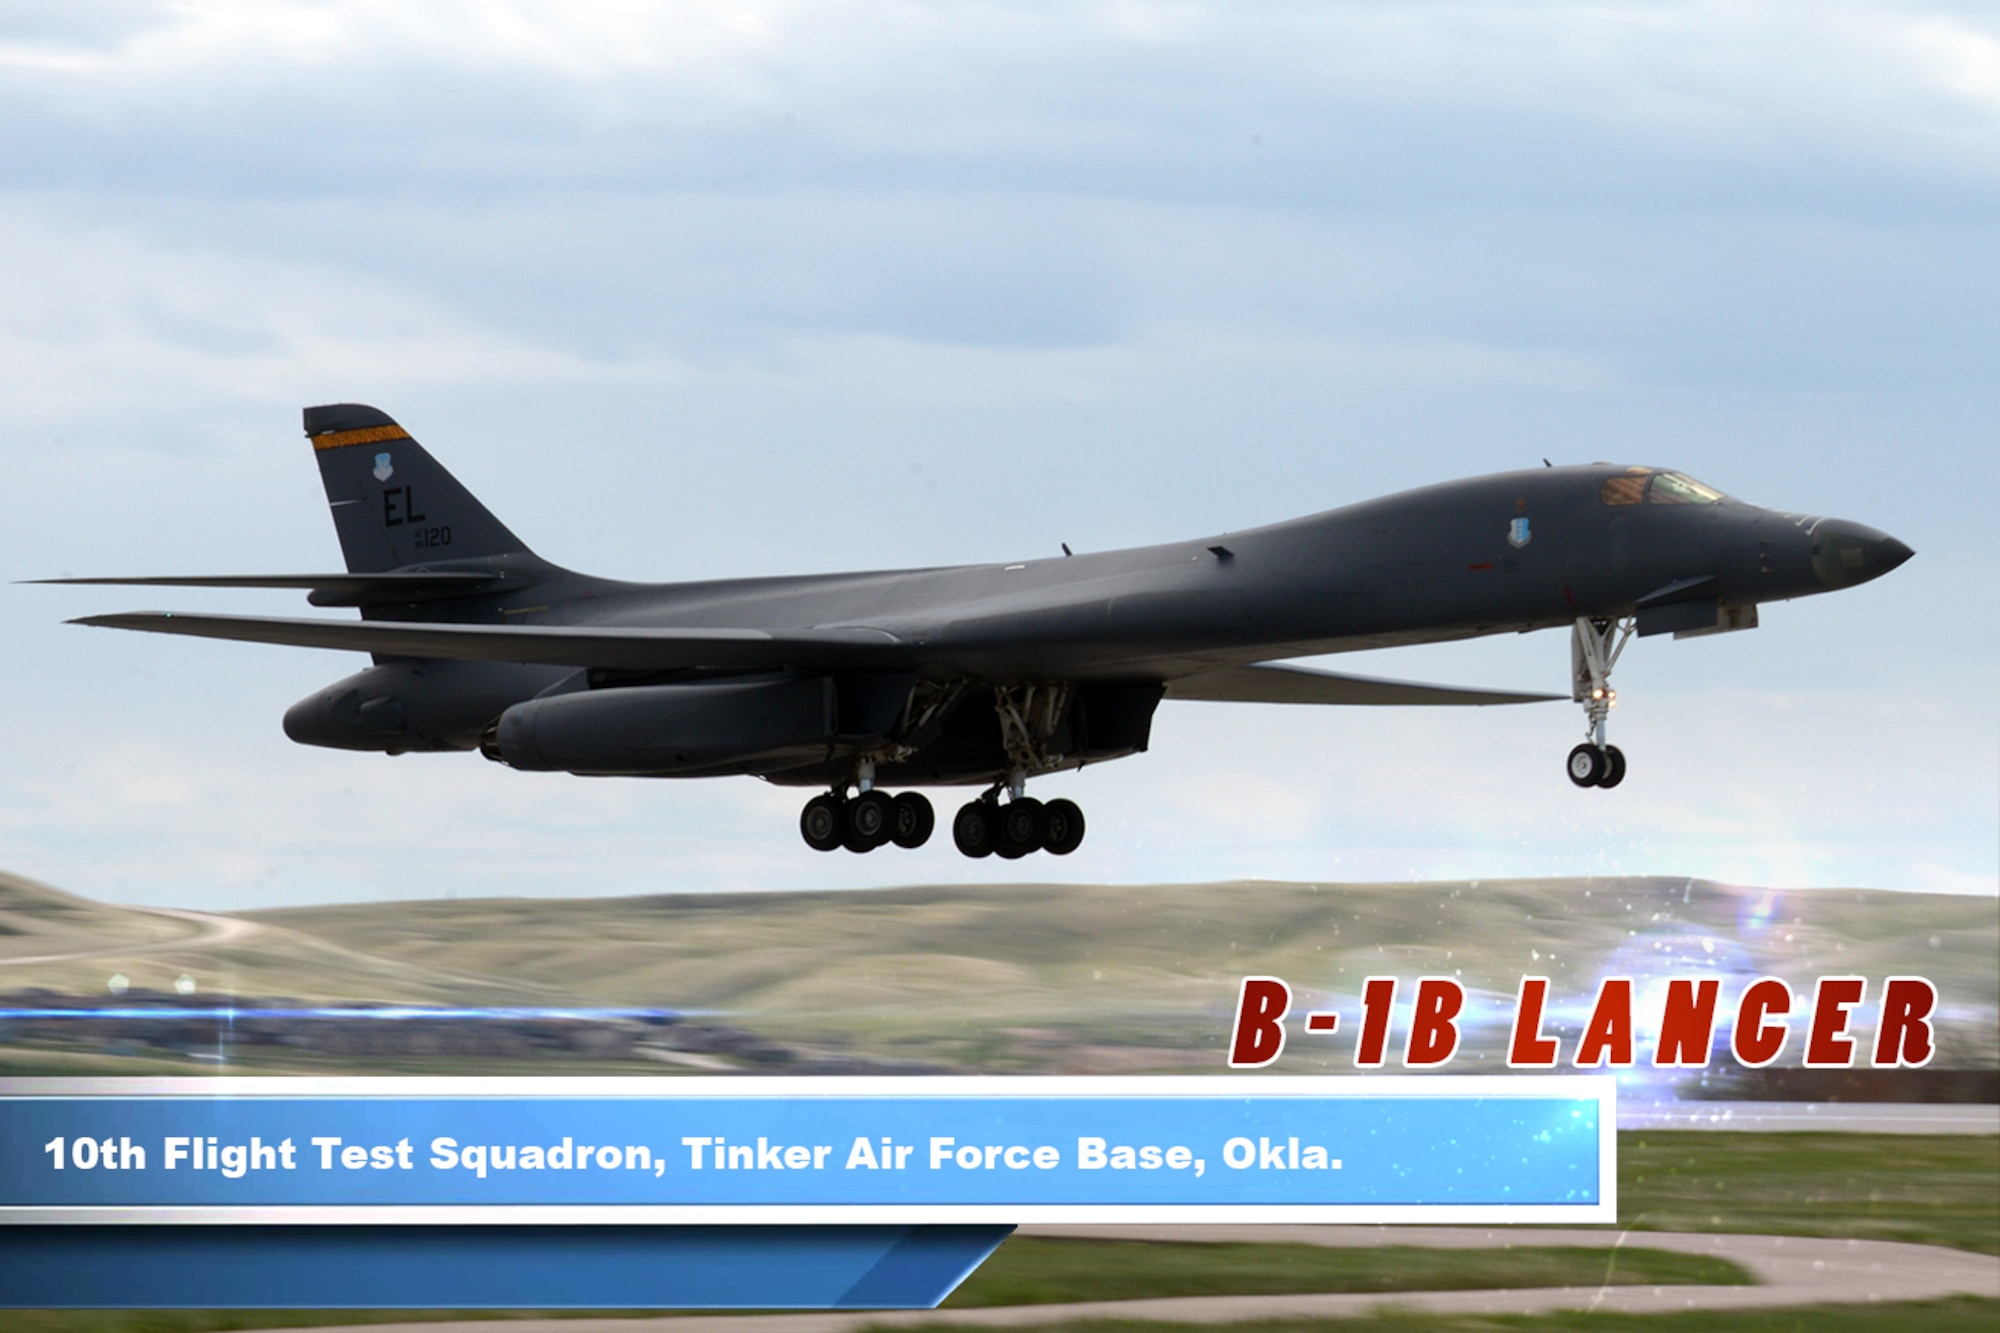 Carrying the largest conventional payload of both guided and unguided weapons in the Air Force inventory, the multi-mission B-1 is the backbone of America's long-range bomber force. It can rapidly deliver massive quantities of precision and non-precision weapons against any adversary, anywhere in the world, at any time.